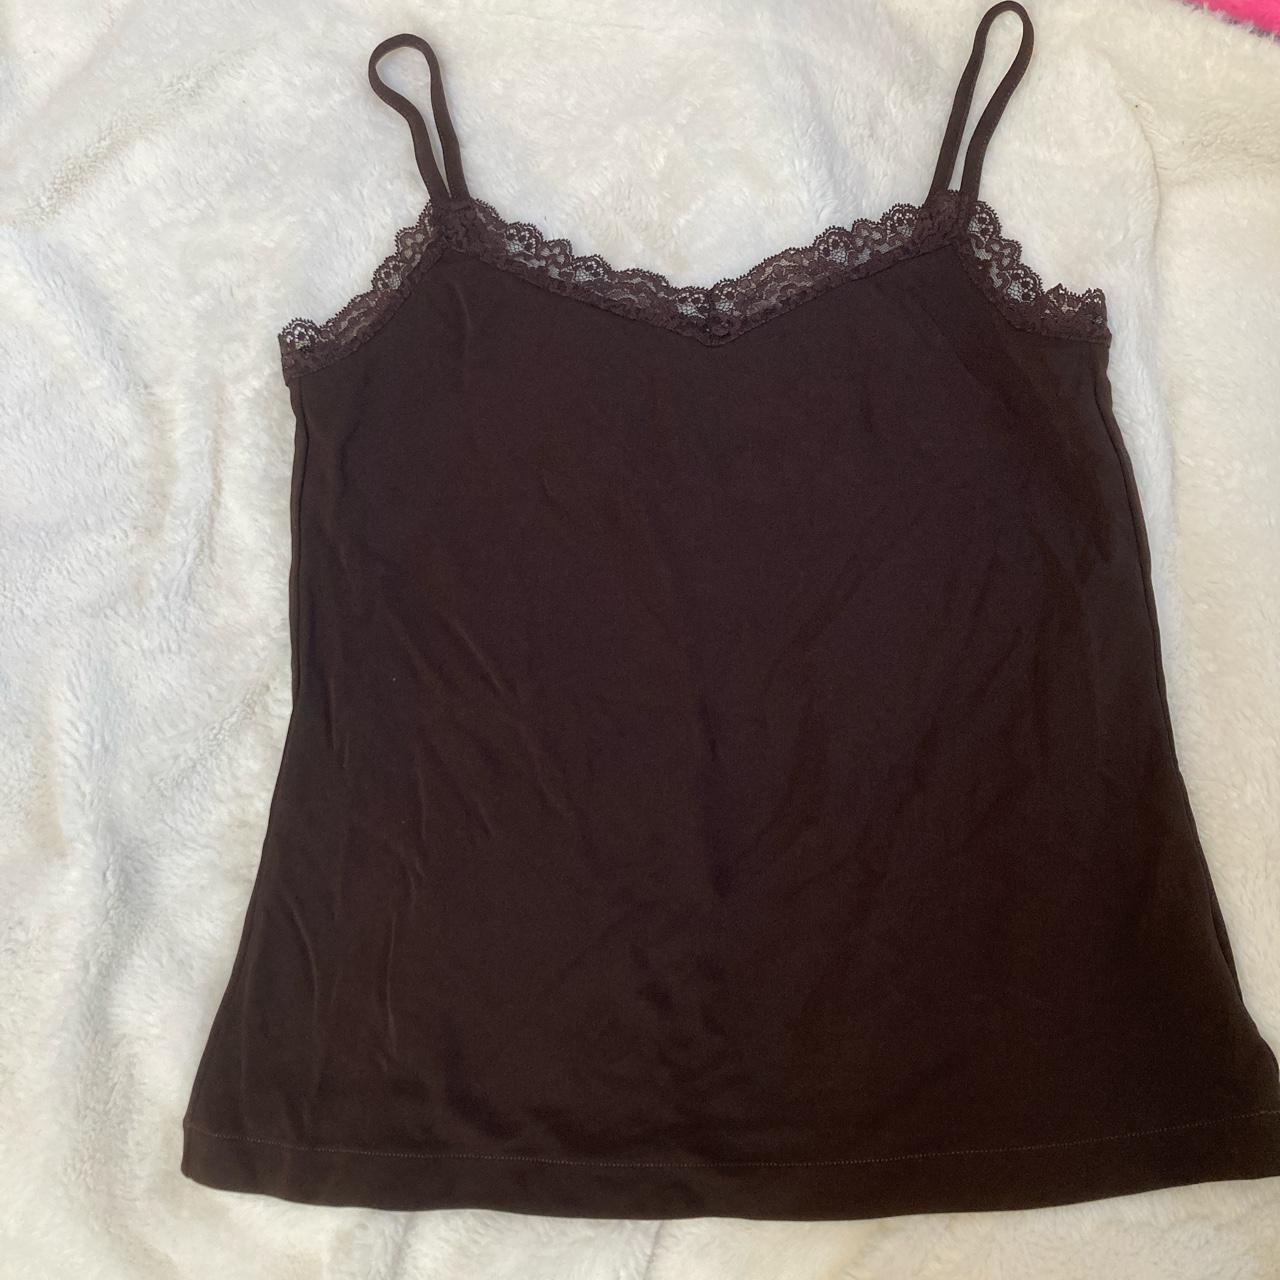 DKNY brown lace trim tank top🤎🤎🤎 material is great,... - Depop